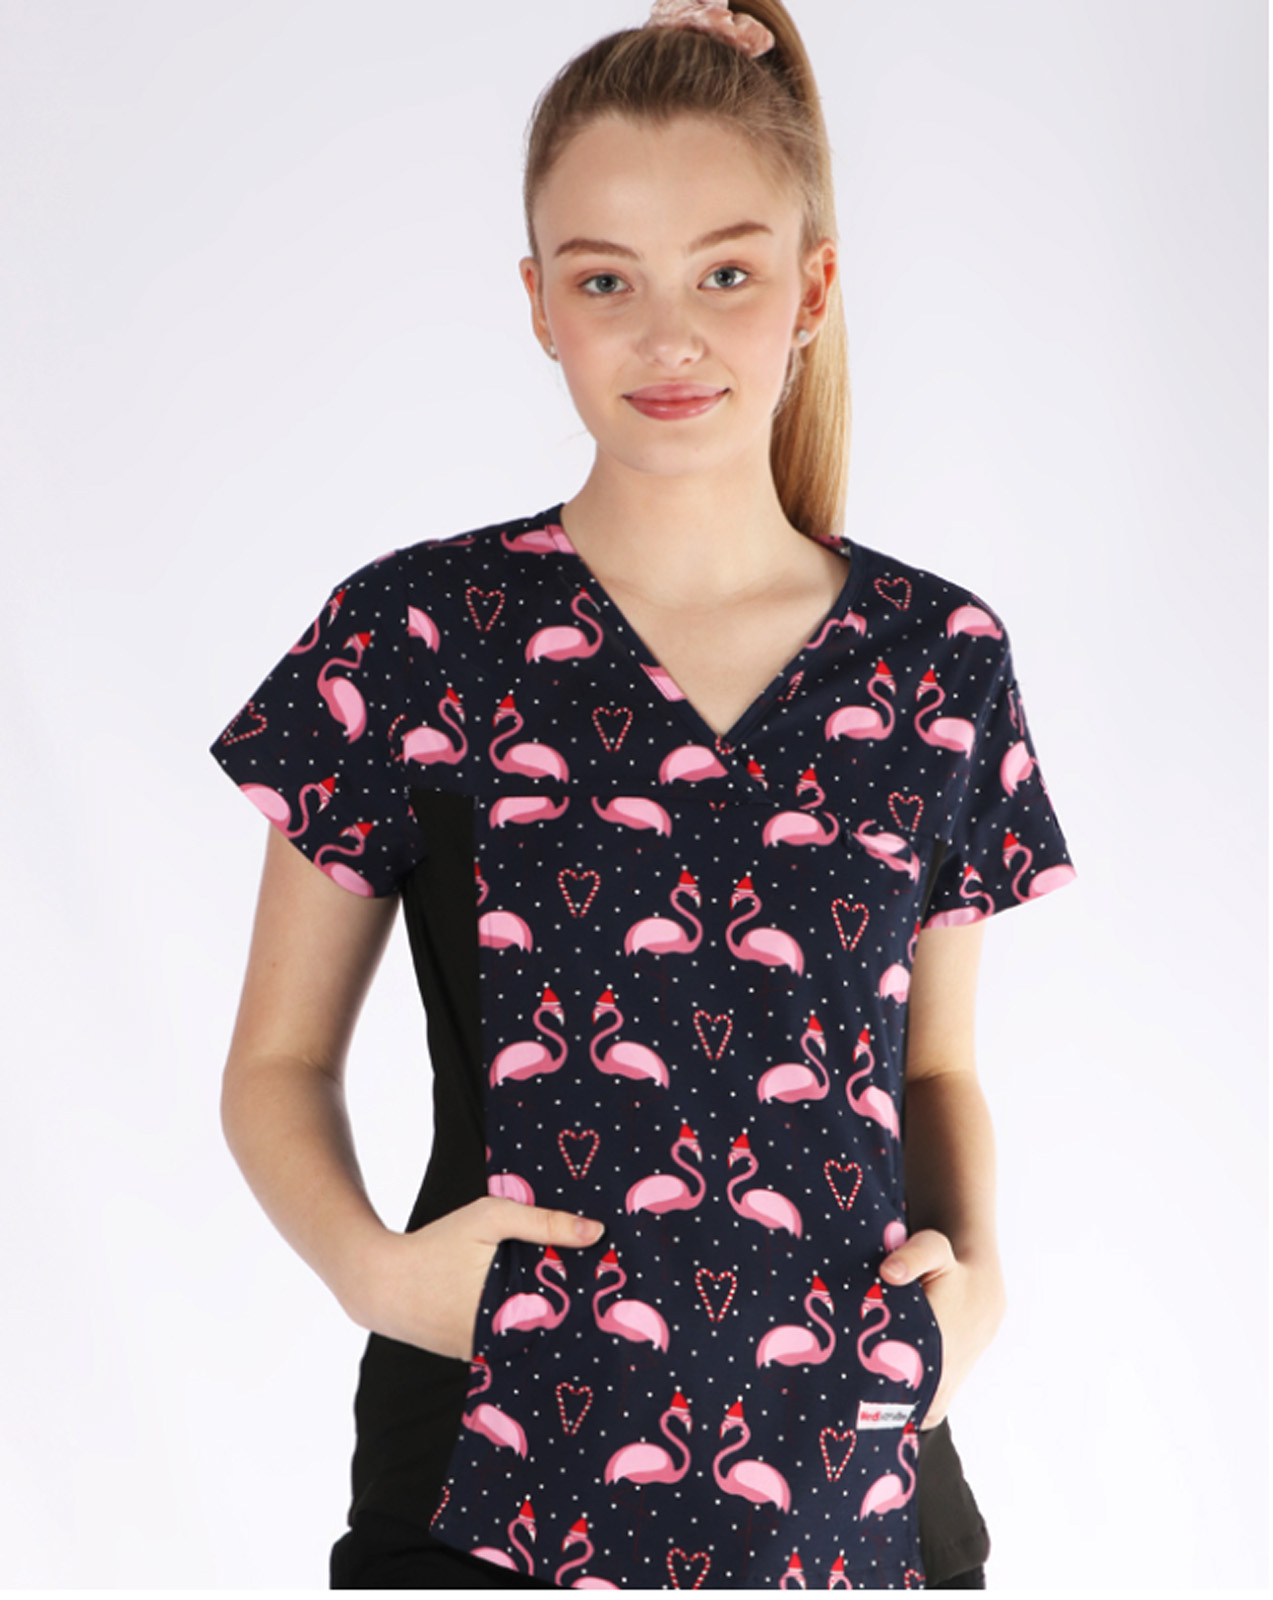 Women's Fit Solid Print Scrub Top With Spandex Panel - Flamingo Christmas